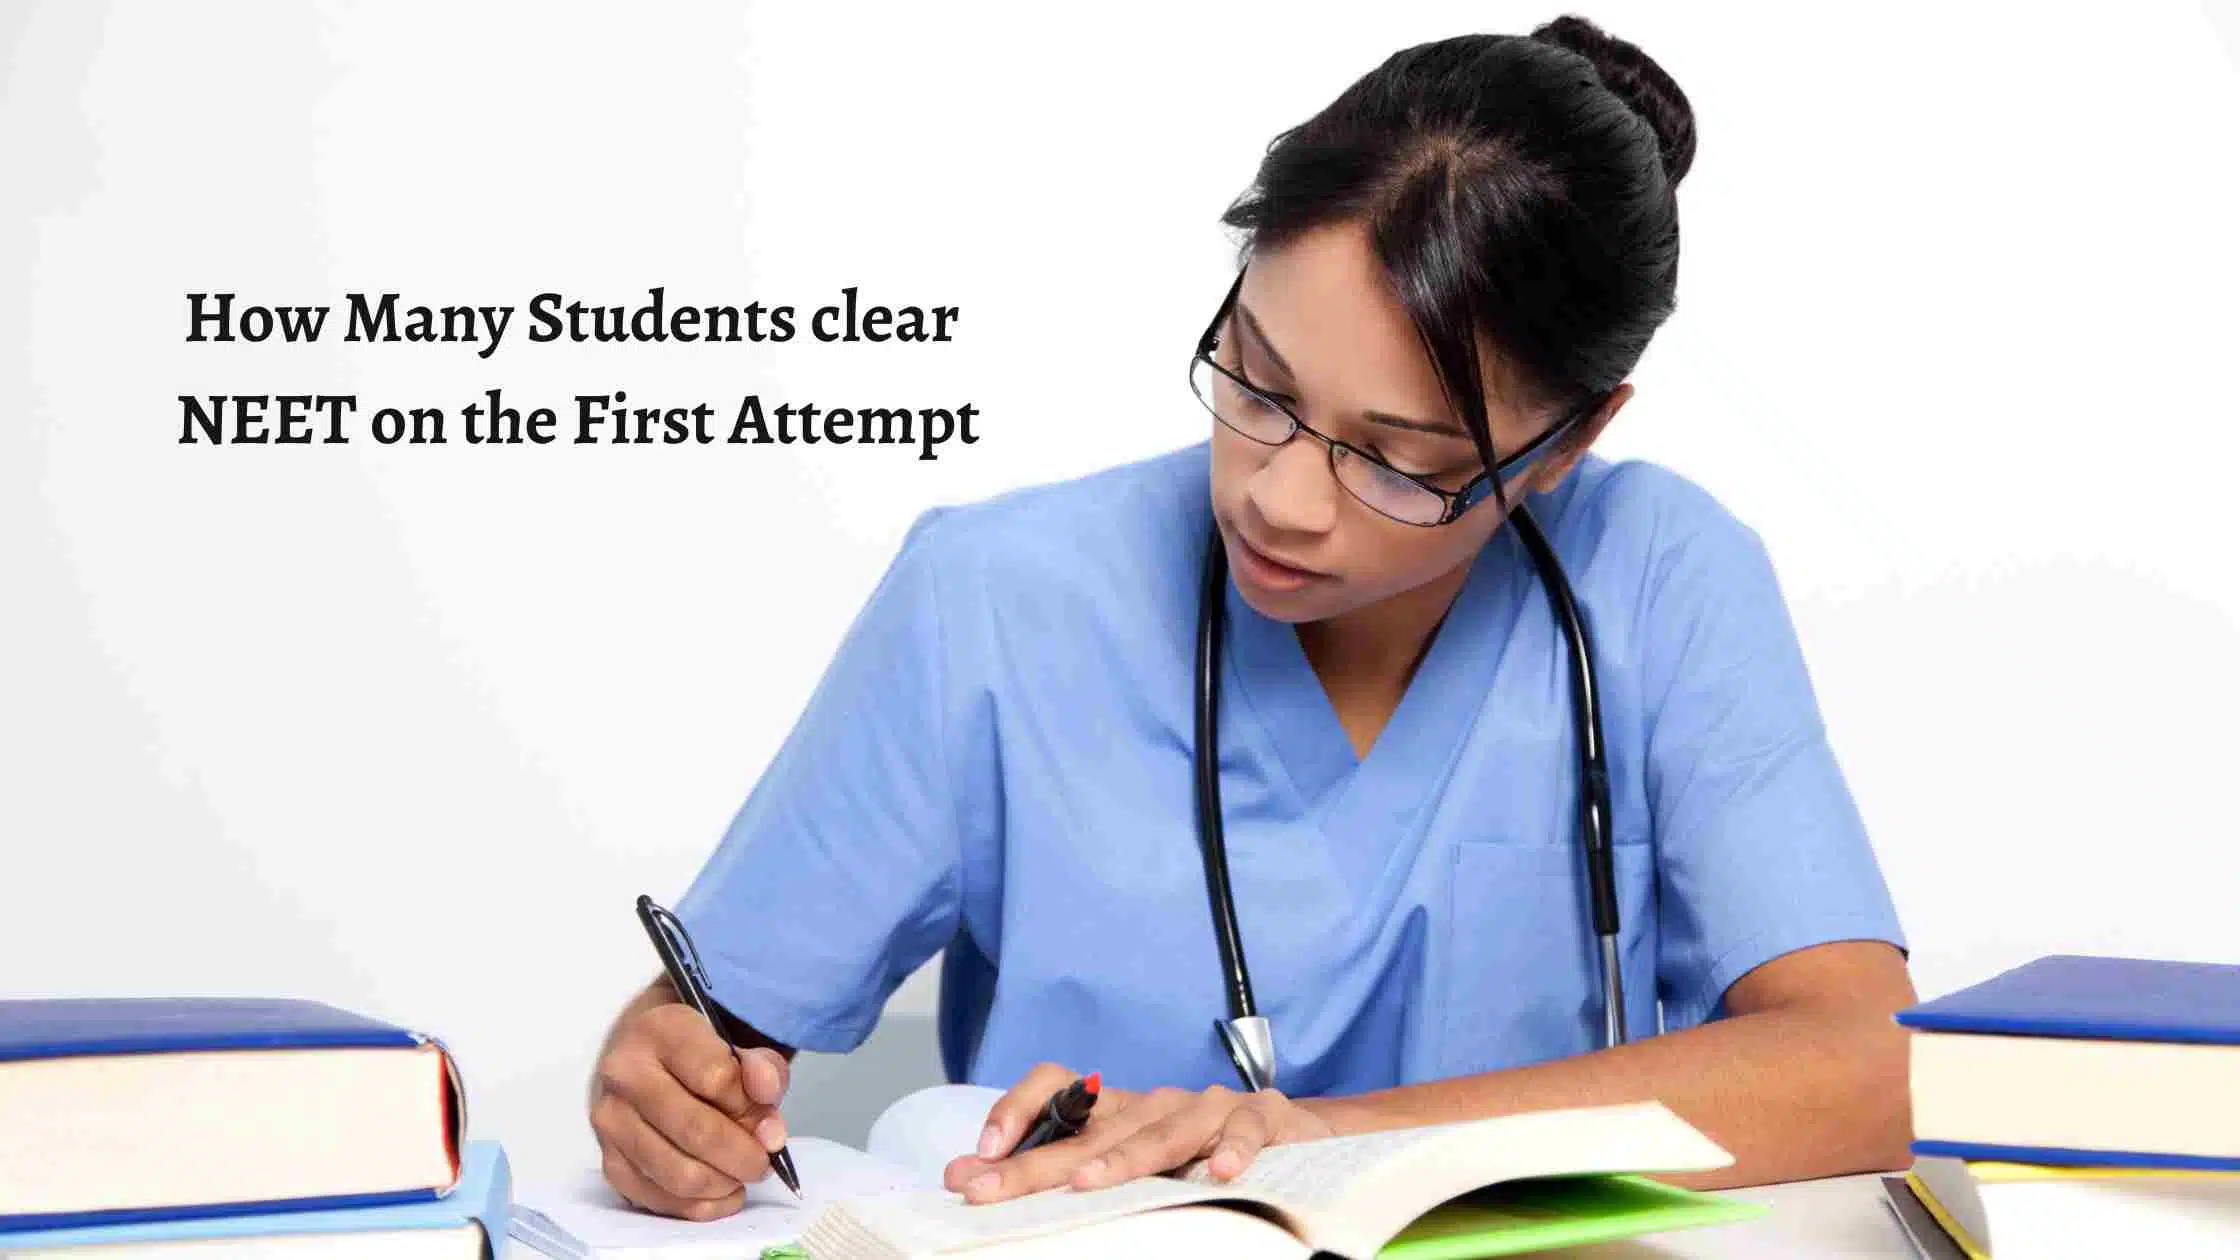 How Many Students clear NEET on the First Attempt